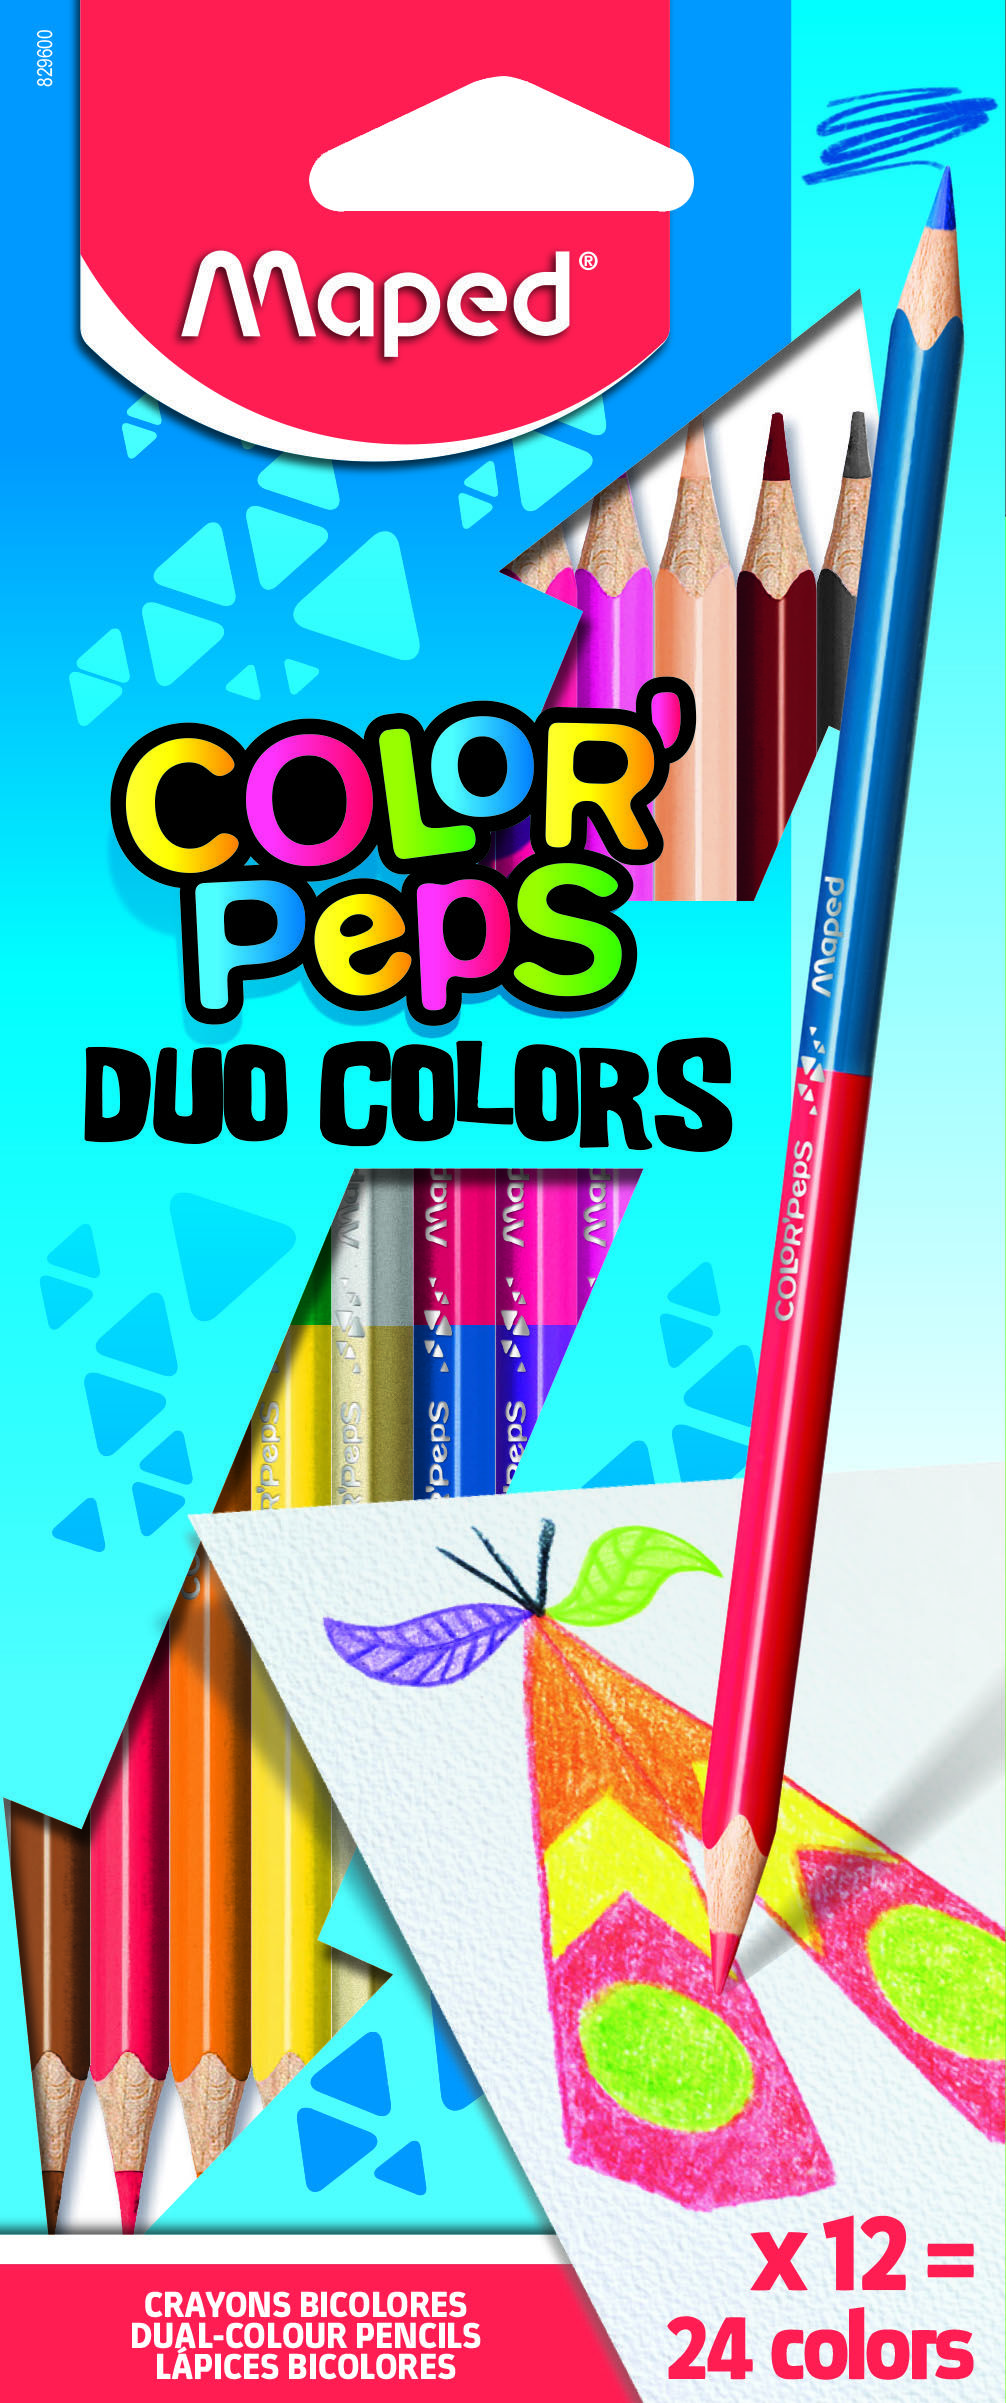    MAPED COLOR'PEPS   , 24 , 12 ., ,  ,    